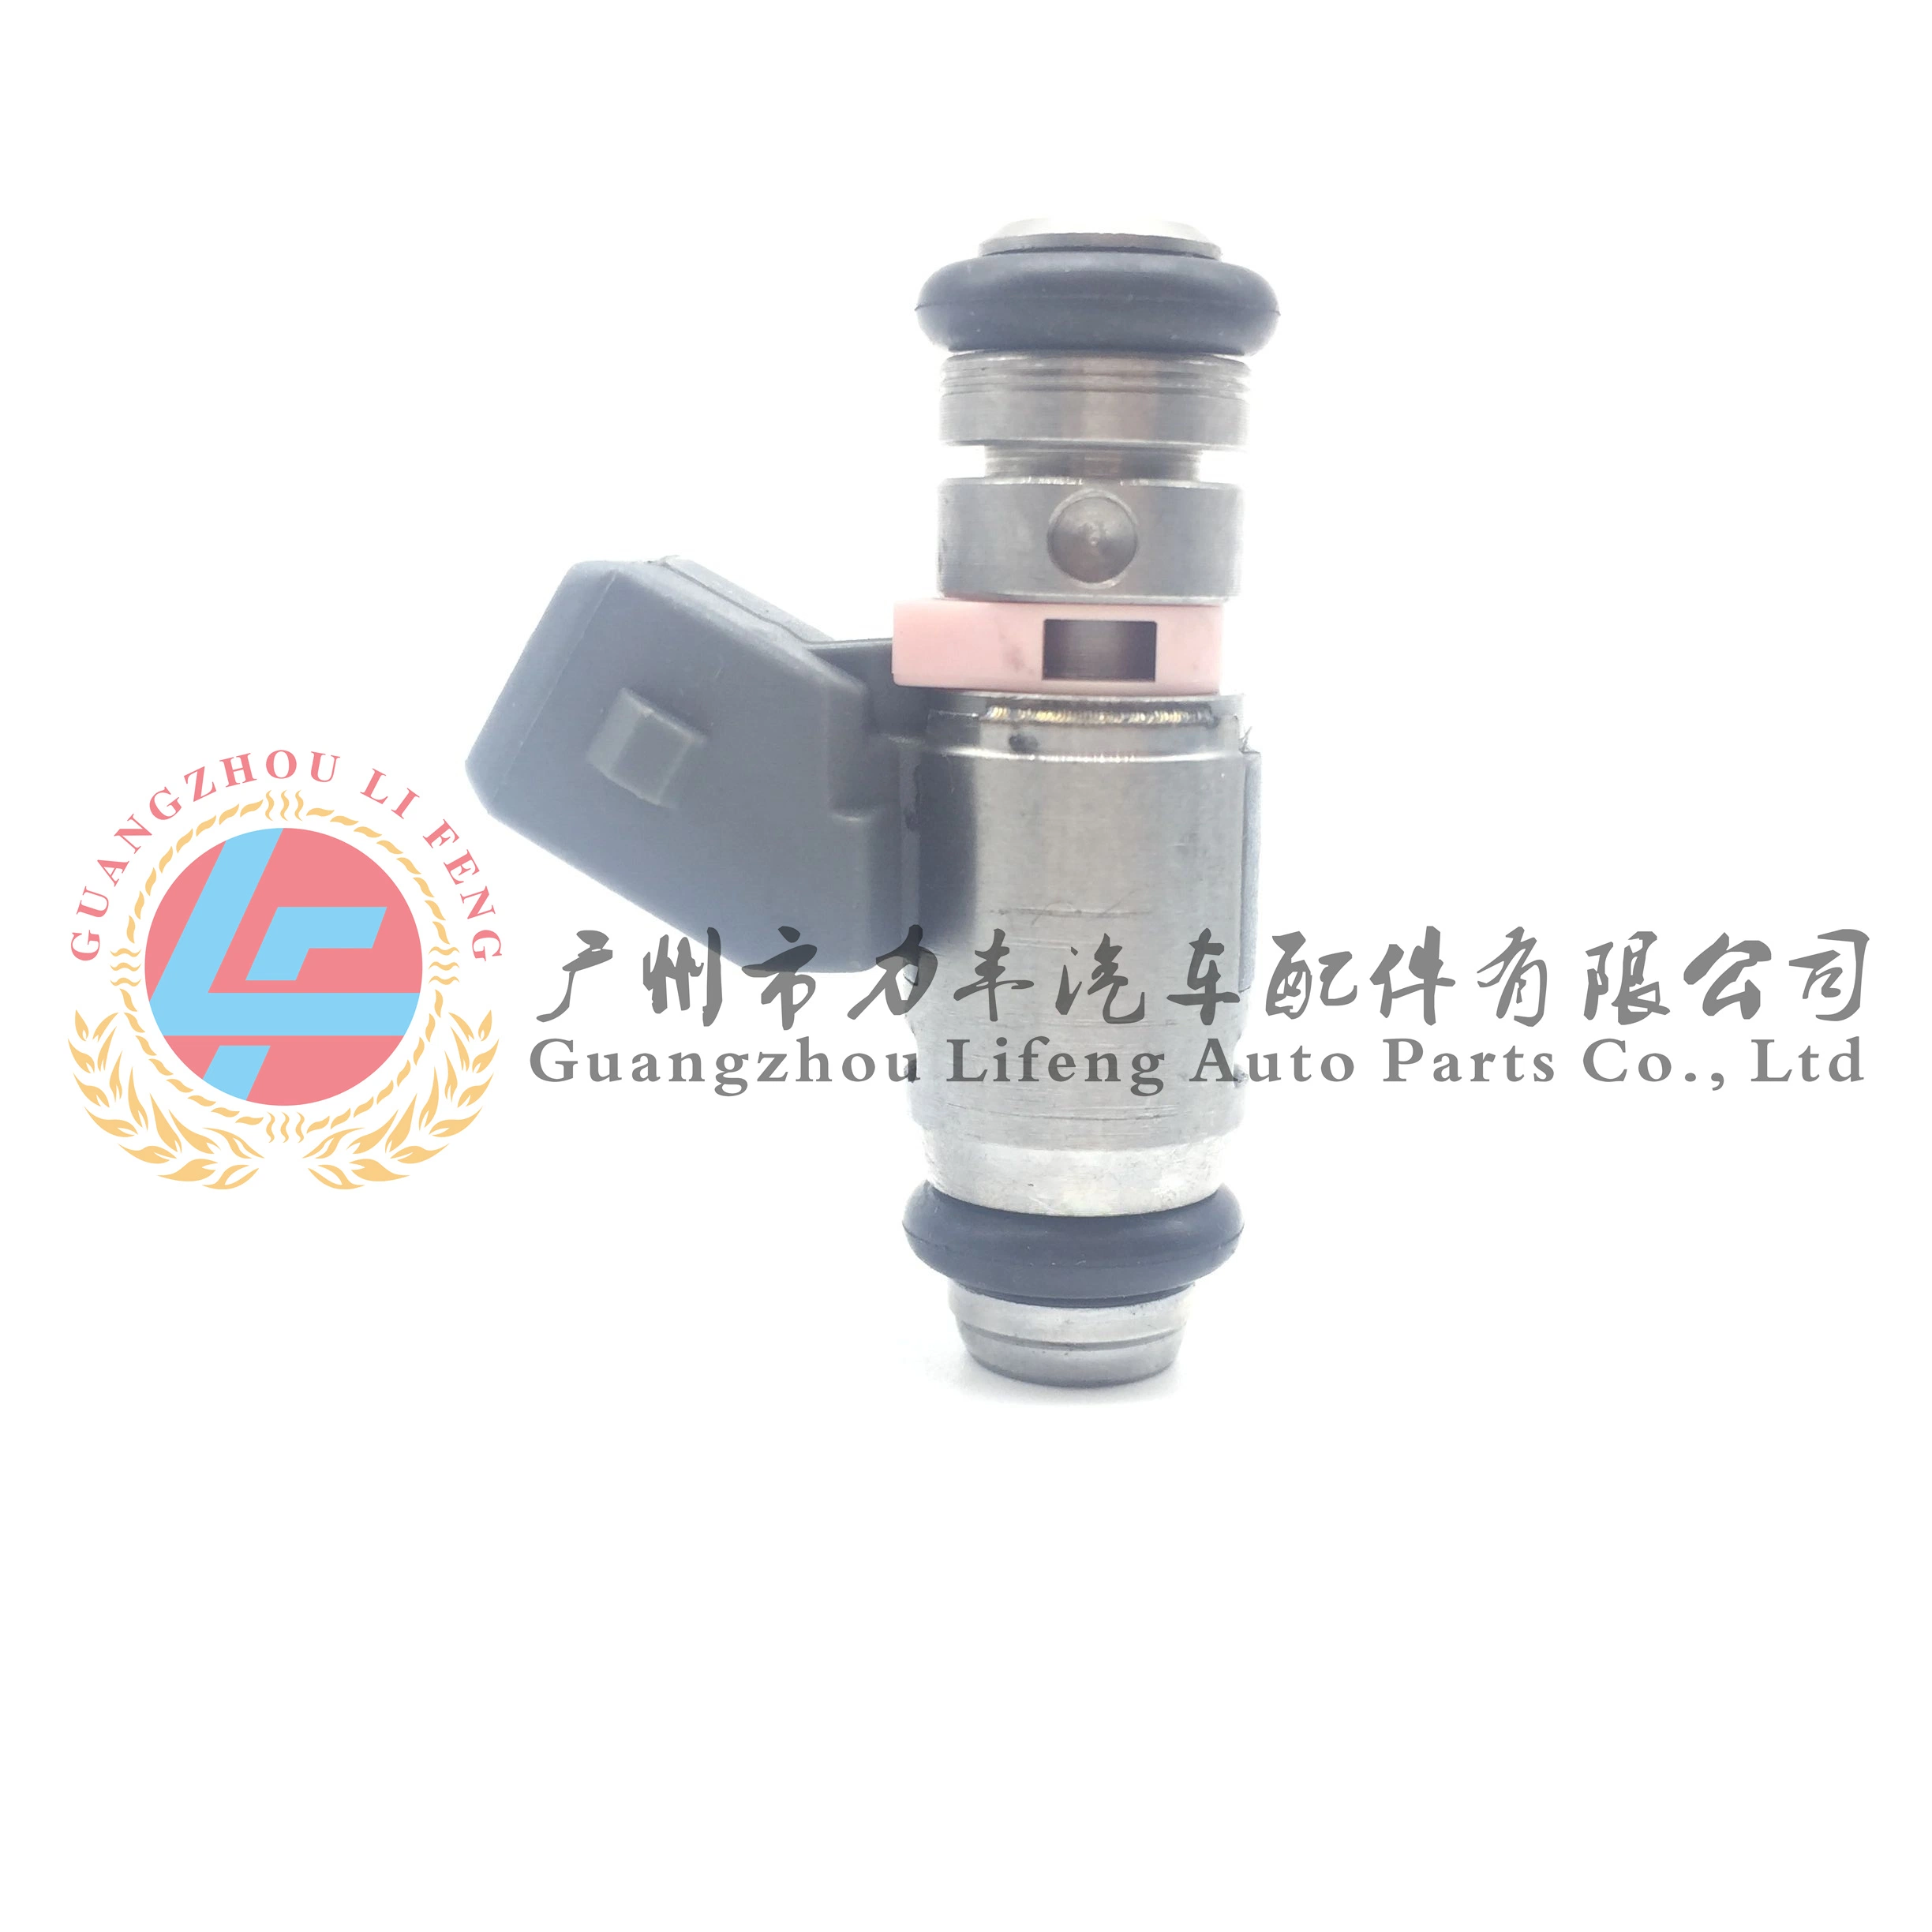 Iwp099 Is Suitable for Logo 206 Car Fuel Injector Nozzle